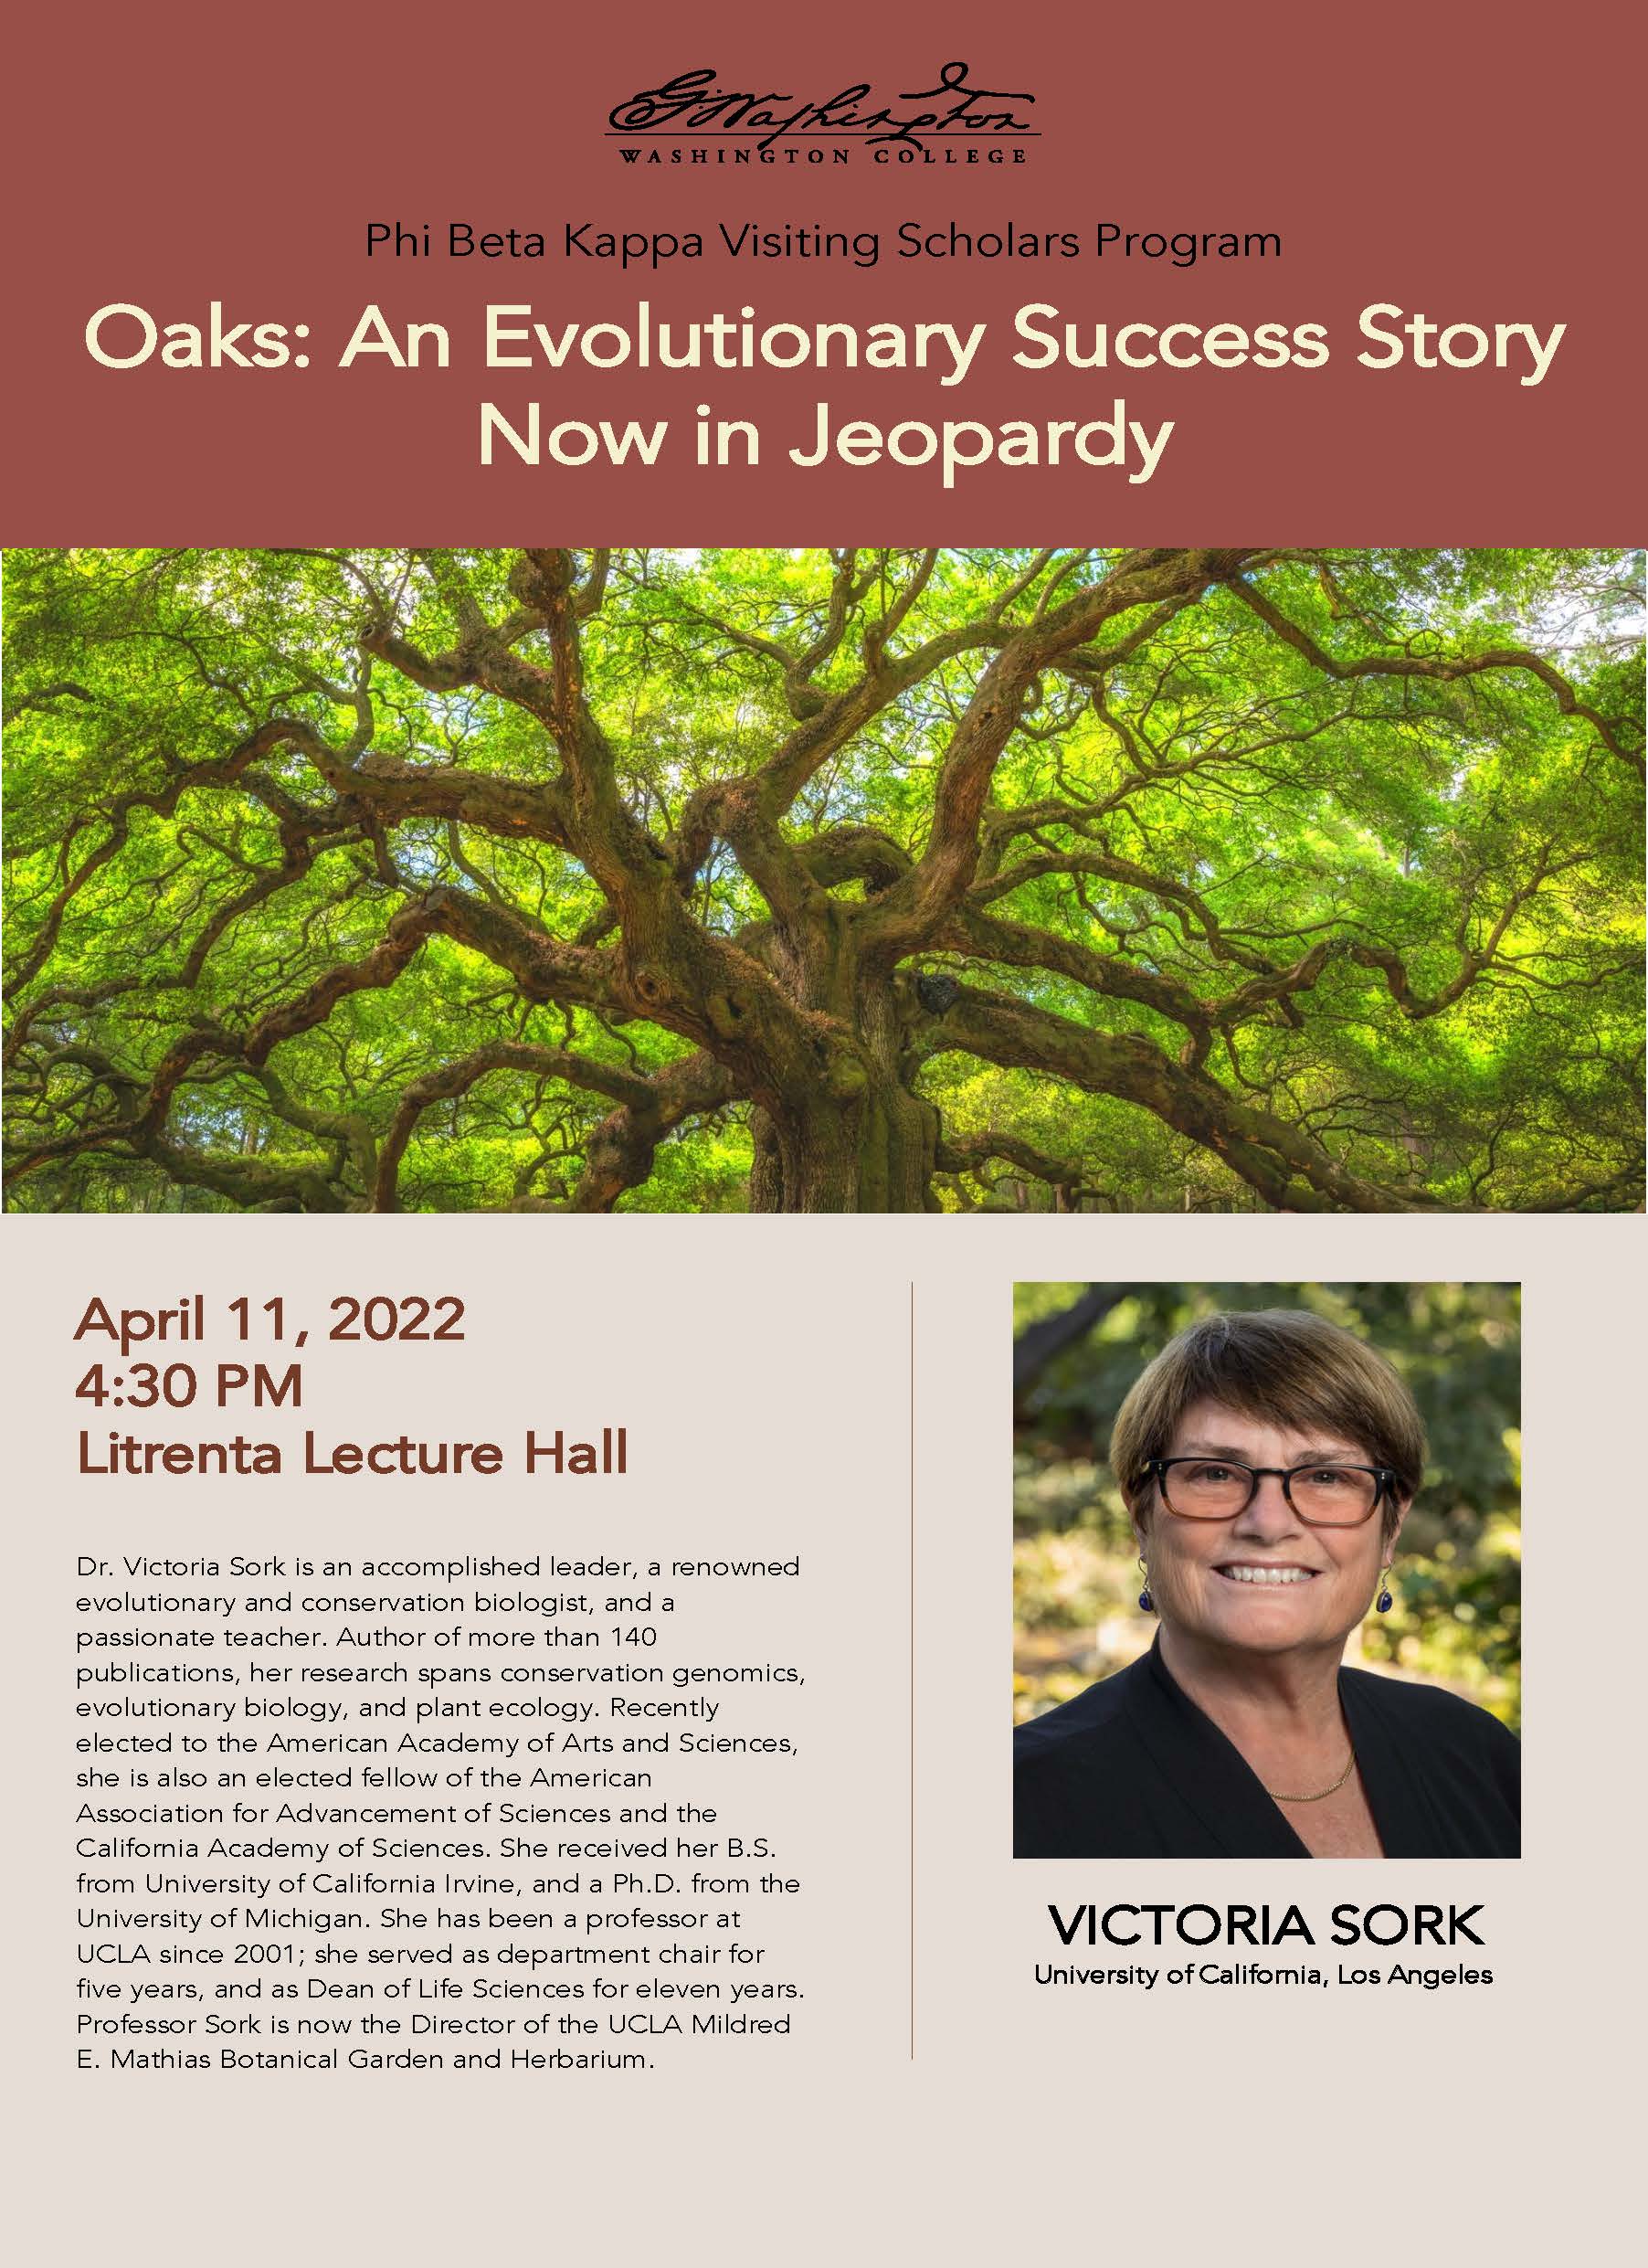 Public Lecture: "Oaks: An Evolutionary Success Story Now in Jeopardy”